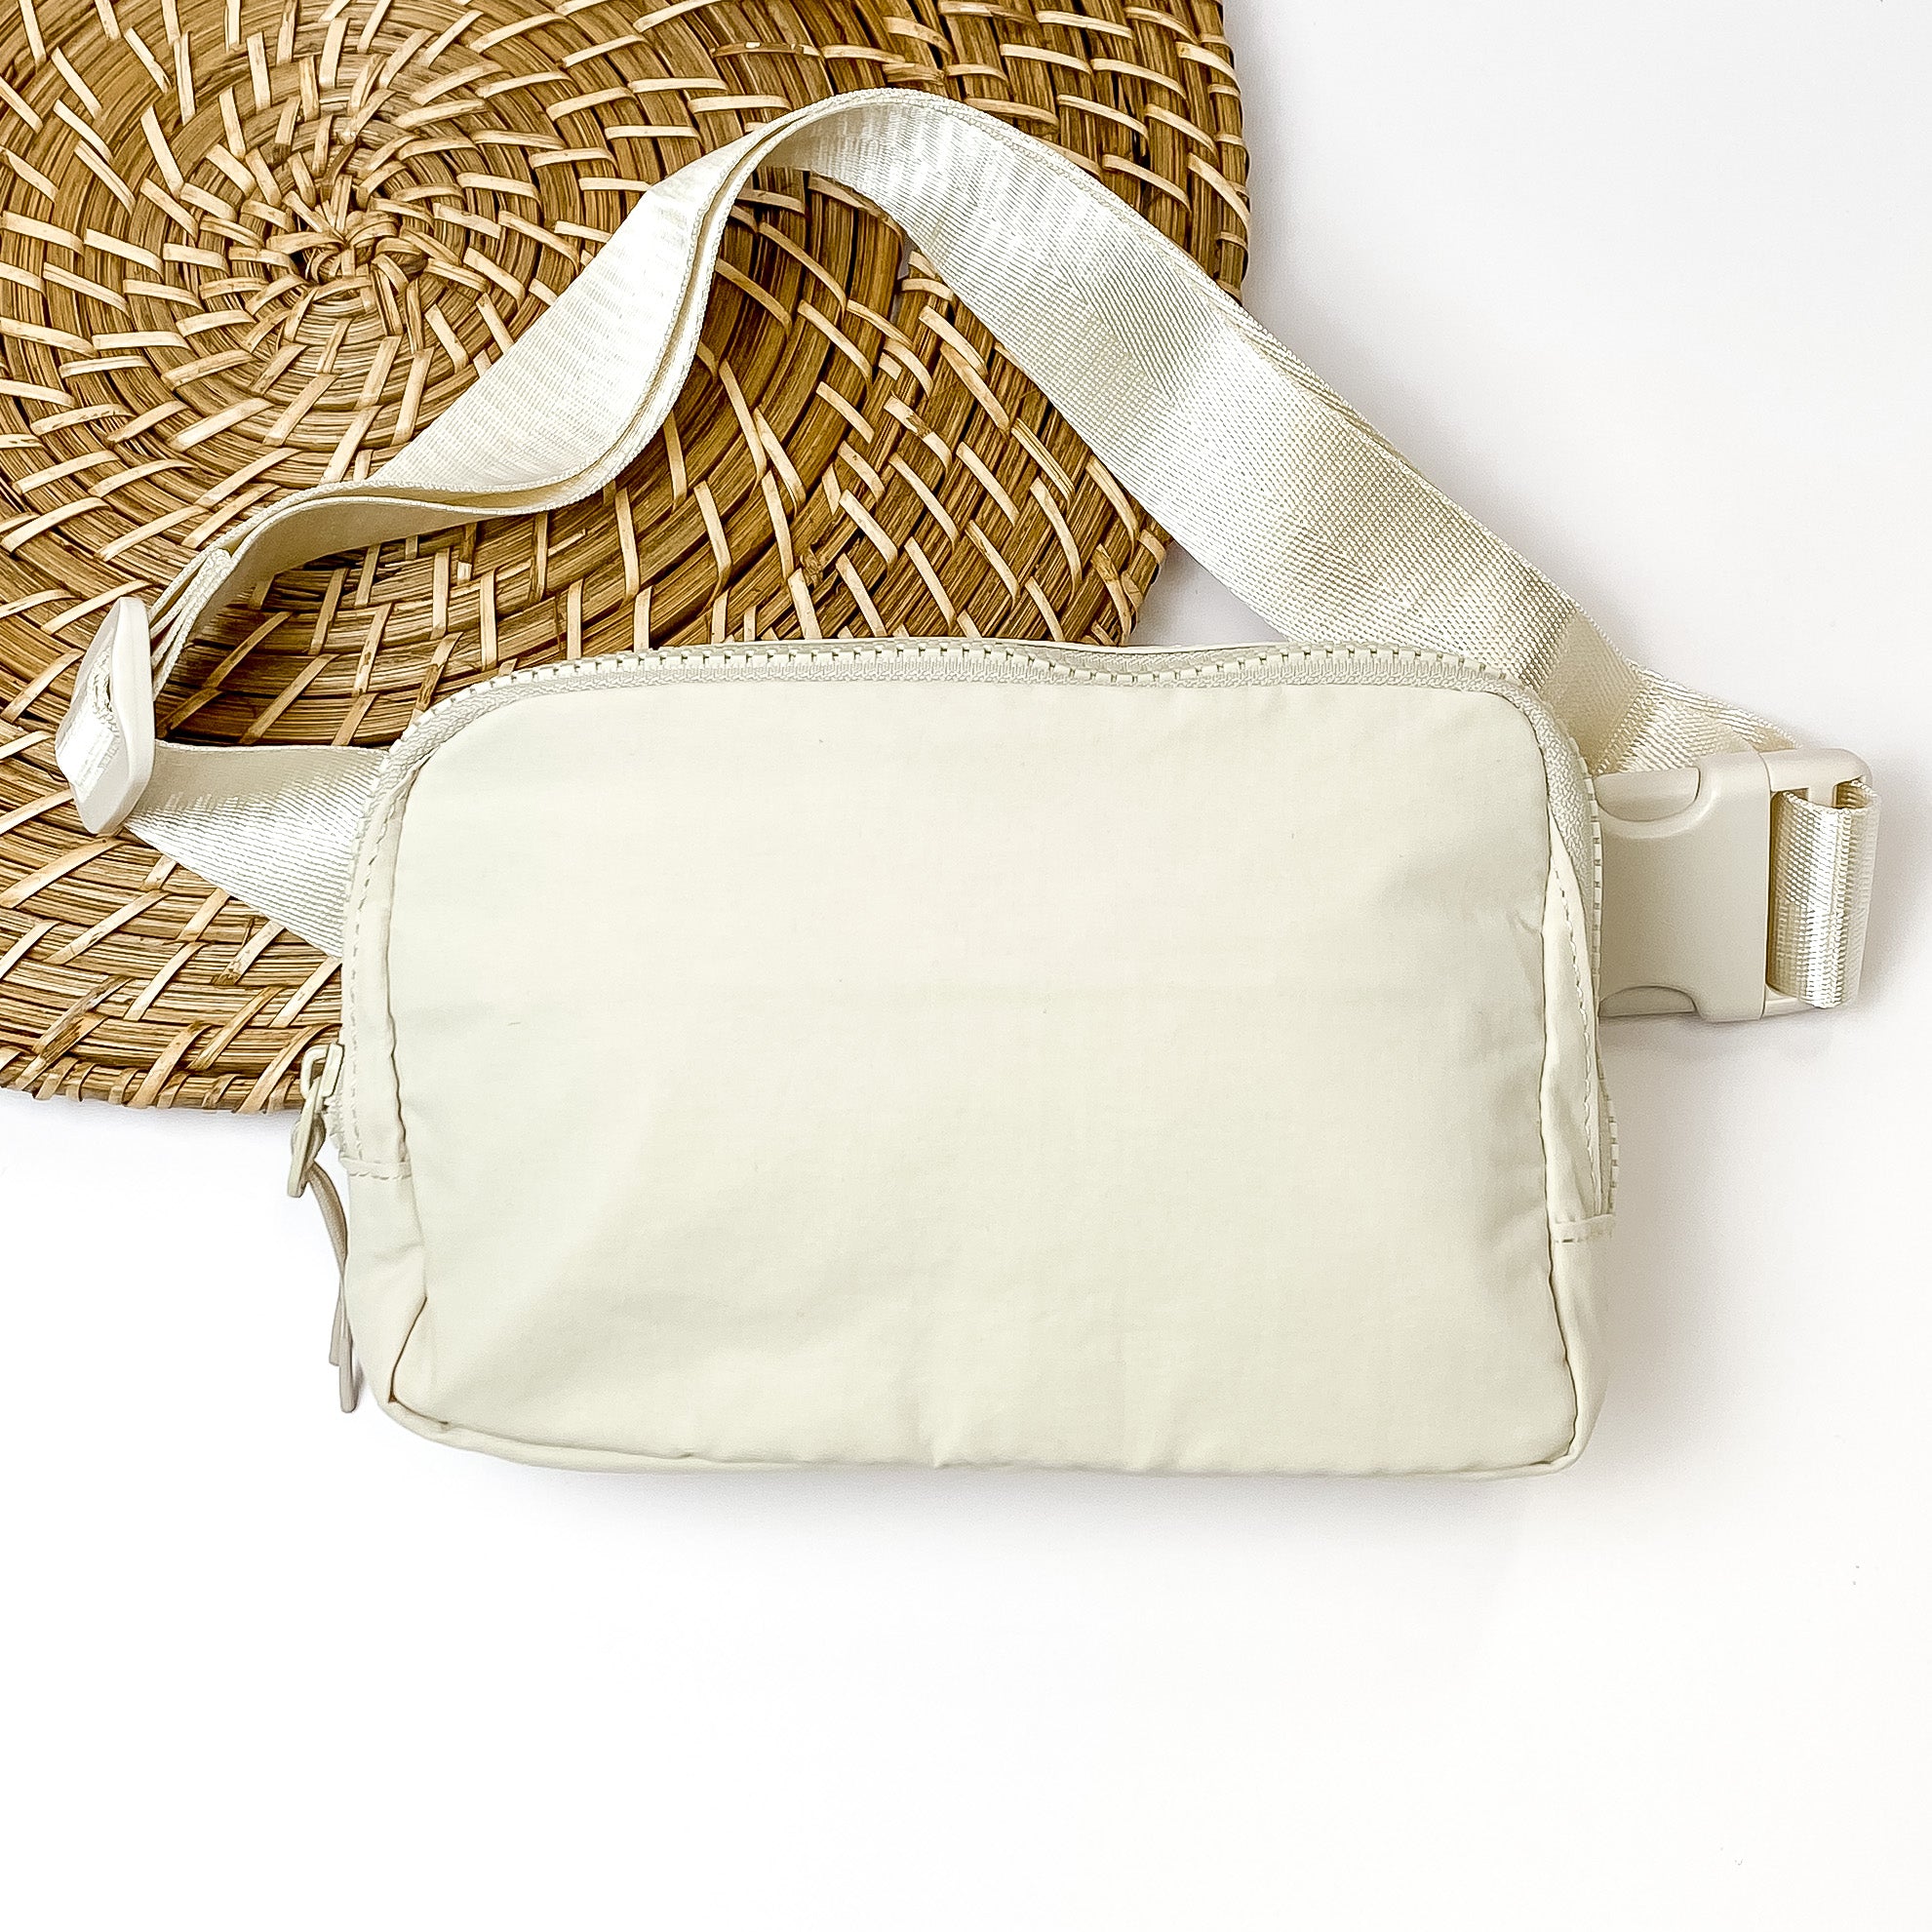 Love the Journey Fanny Pack in Beige